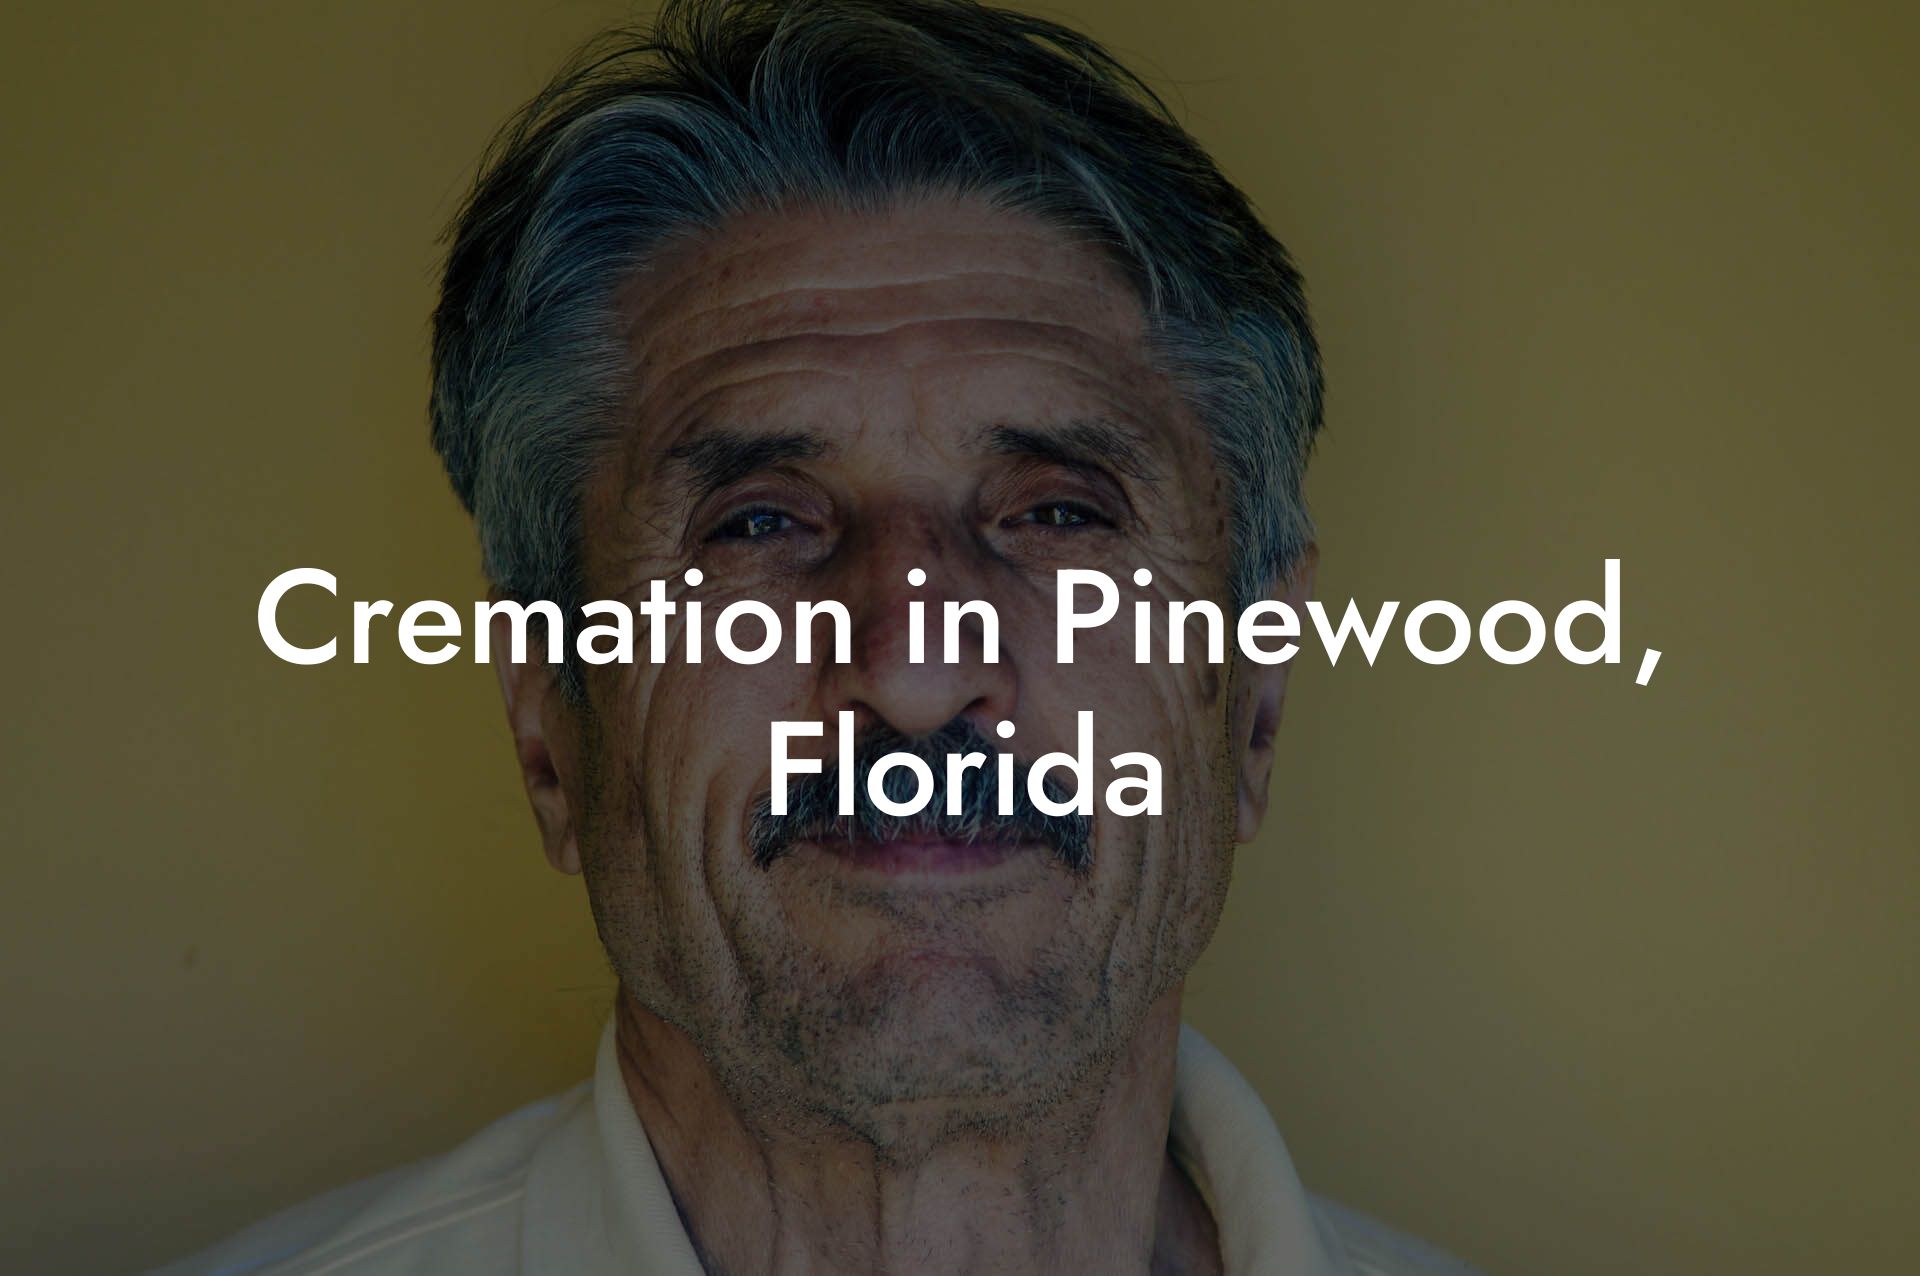 Cremation in Pinewood, Florida